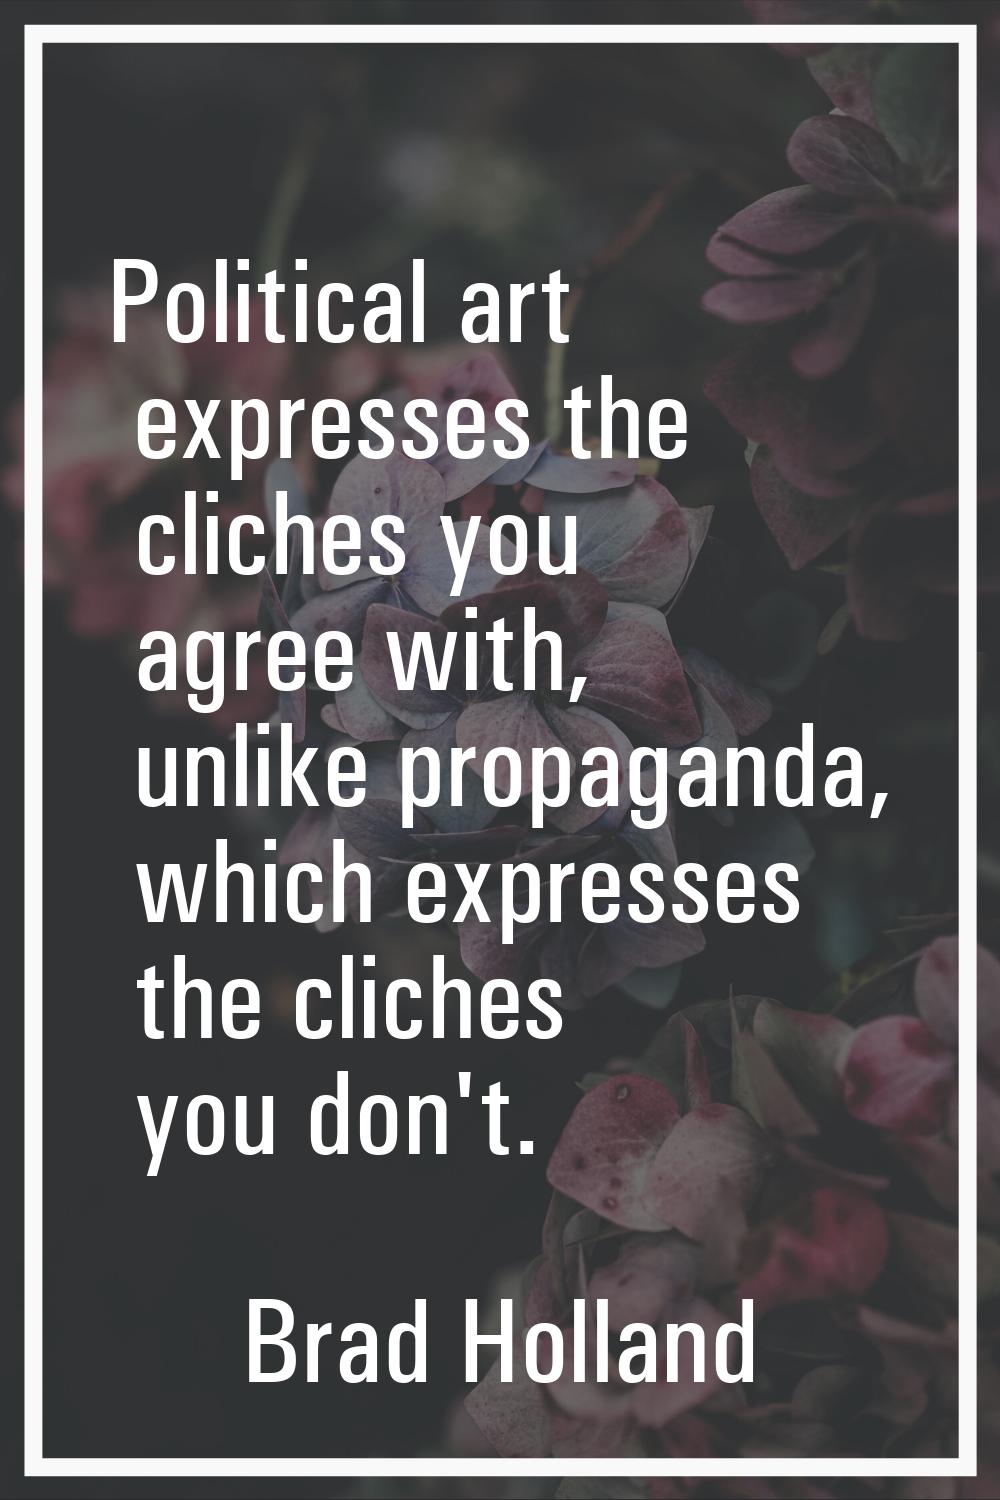 Political art expresses the cliches you agree with, unlike propaganda, which expresses the cliches 